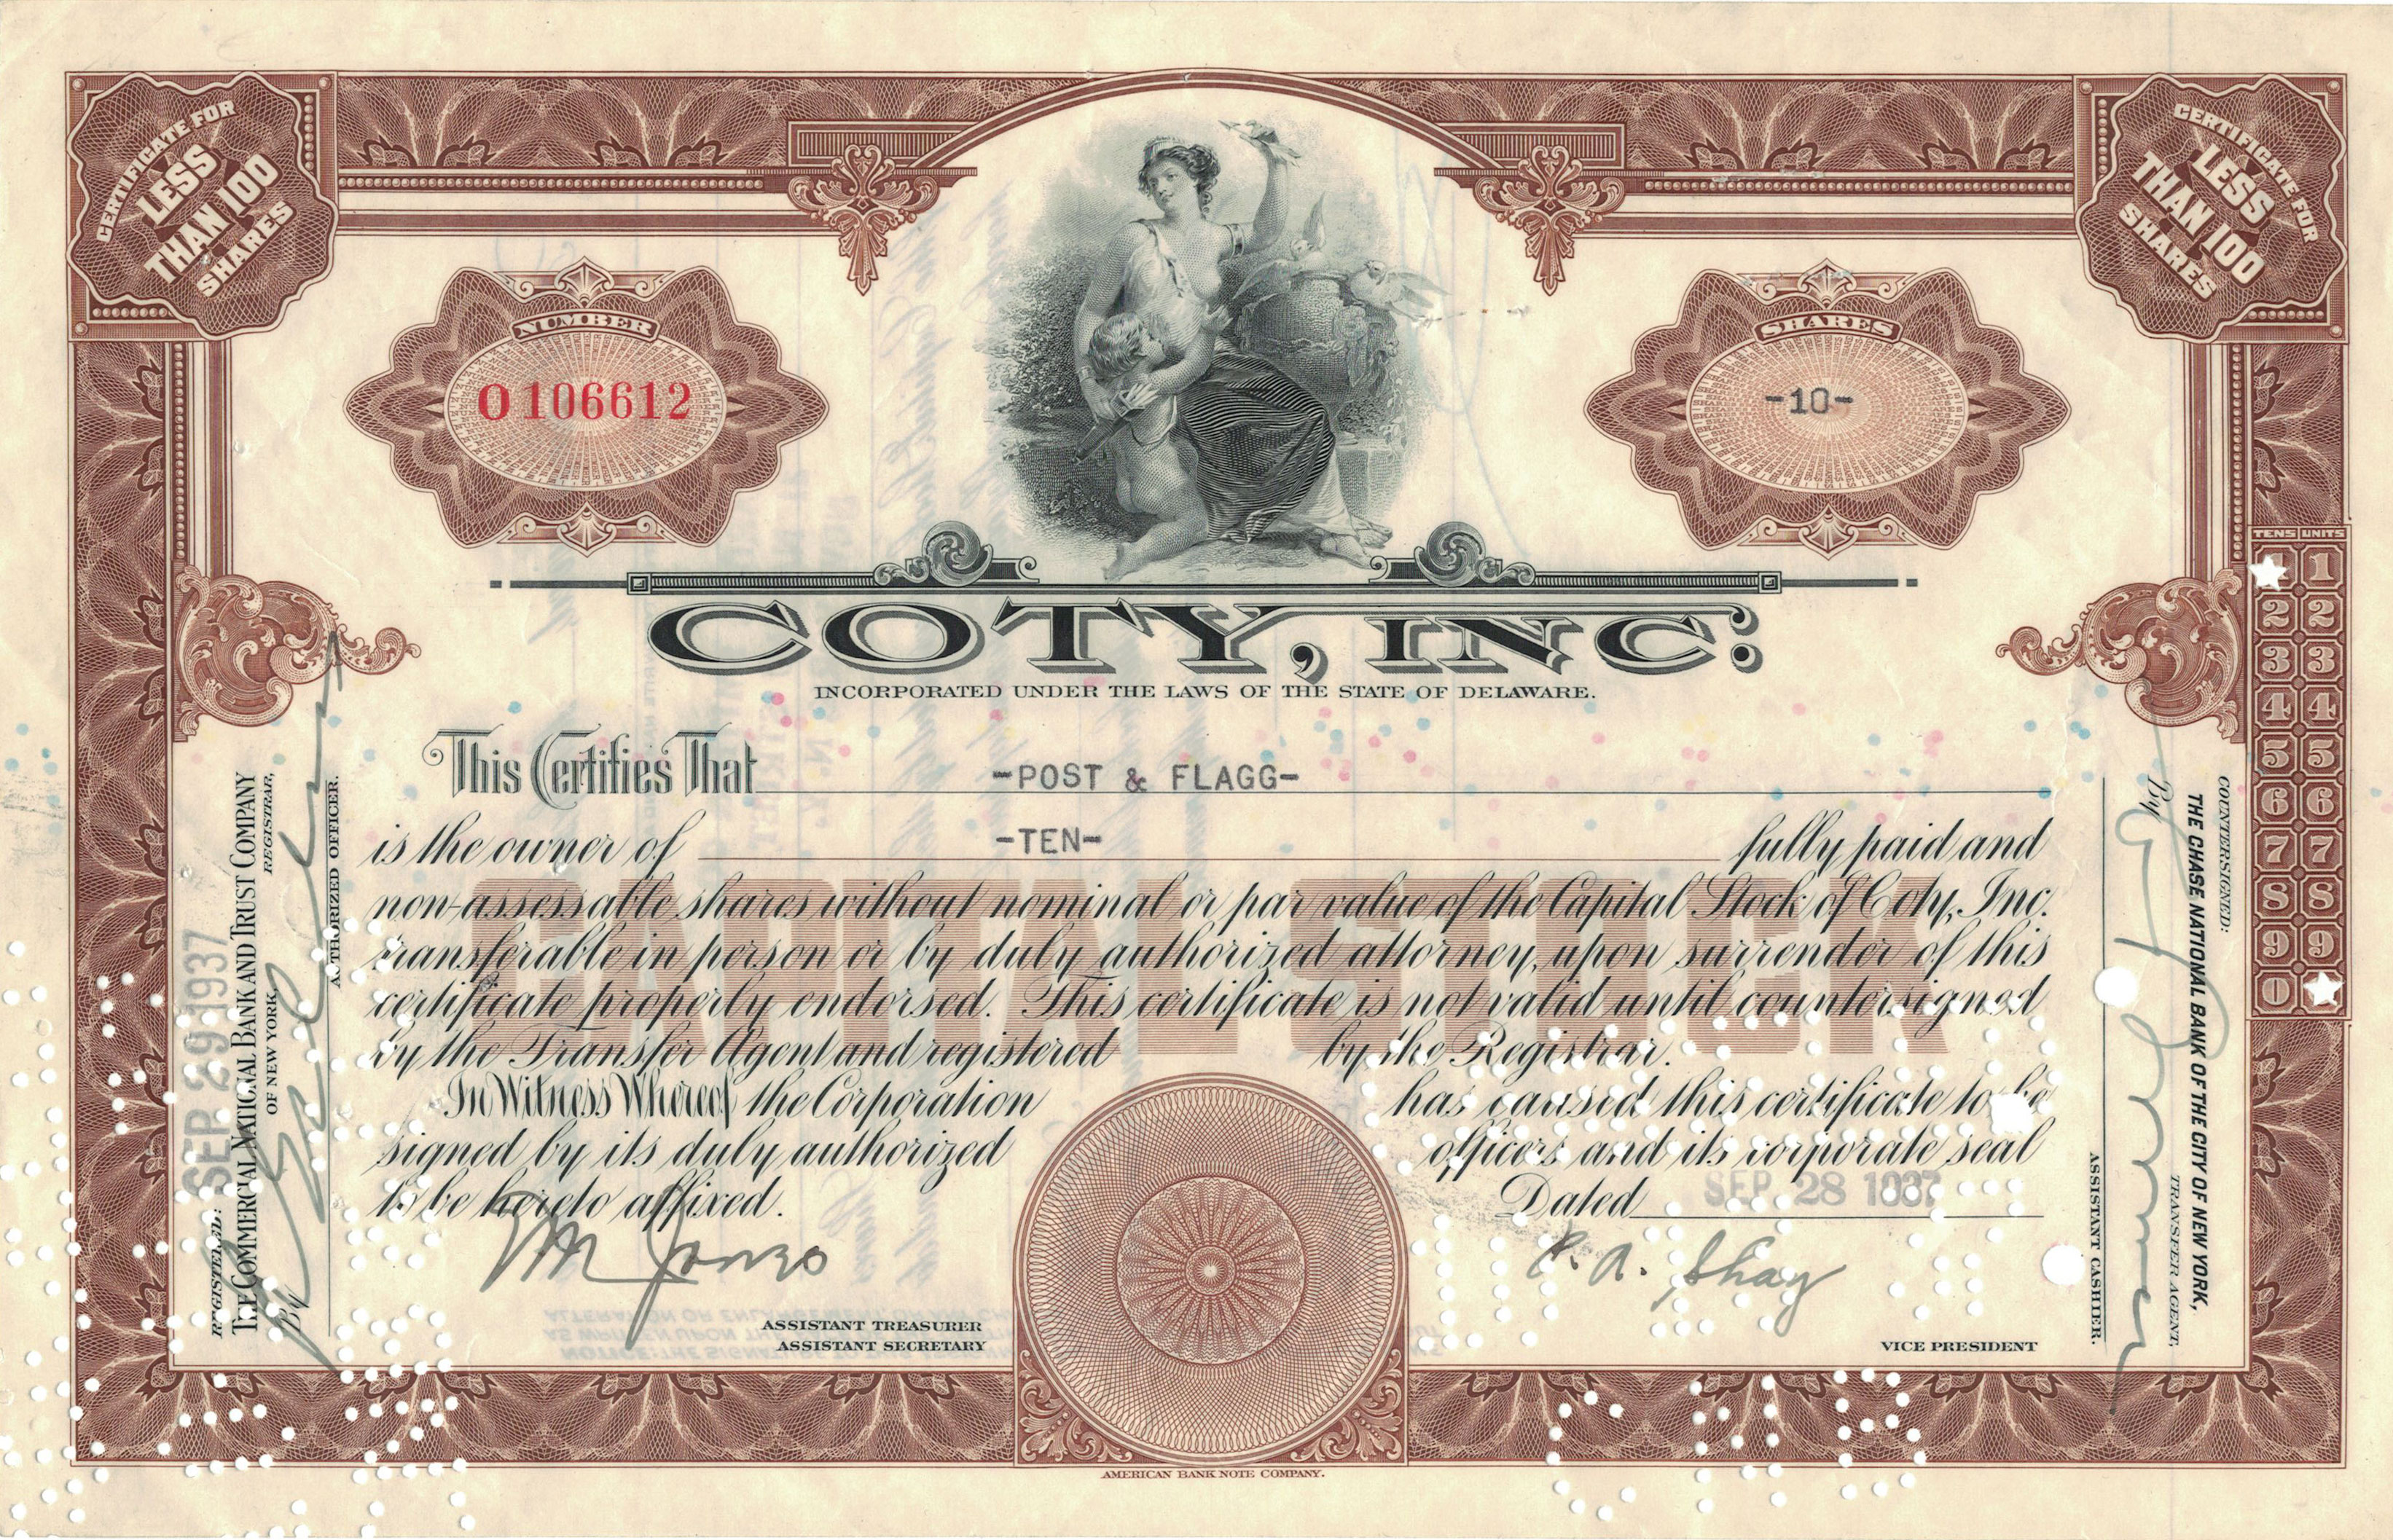 Black Mammoth Consolidated Mines Terex Corporation Certificate 